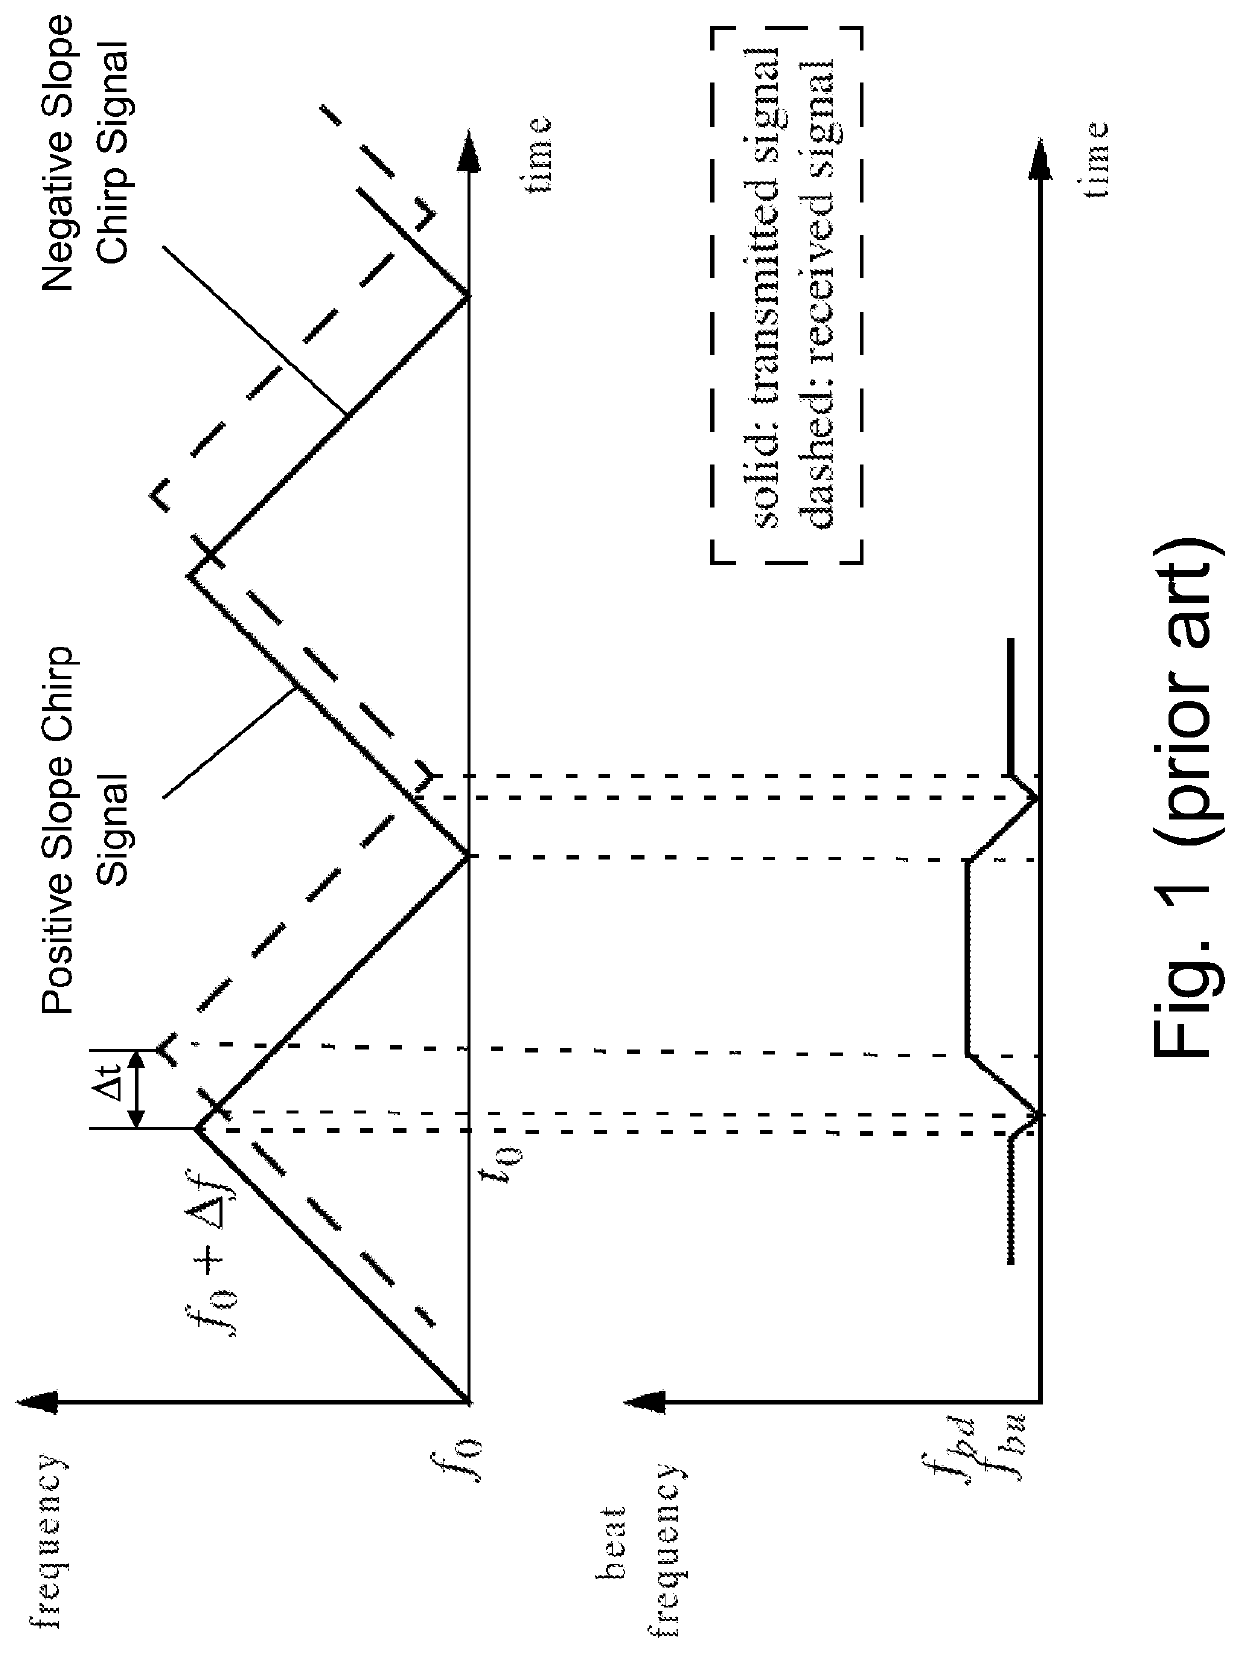 Method for separating targets and clutter from noise, in radar signals